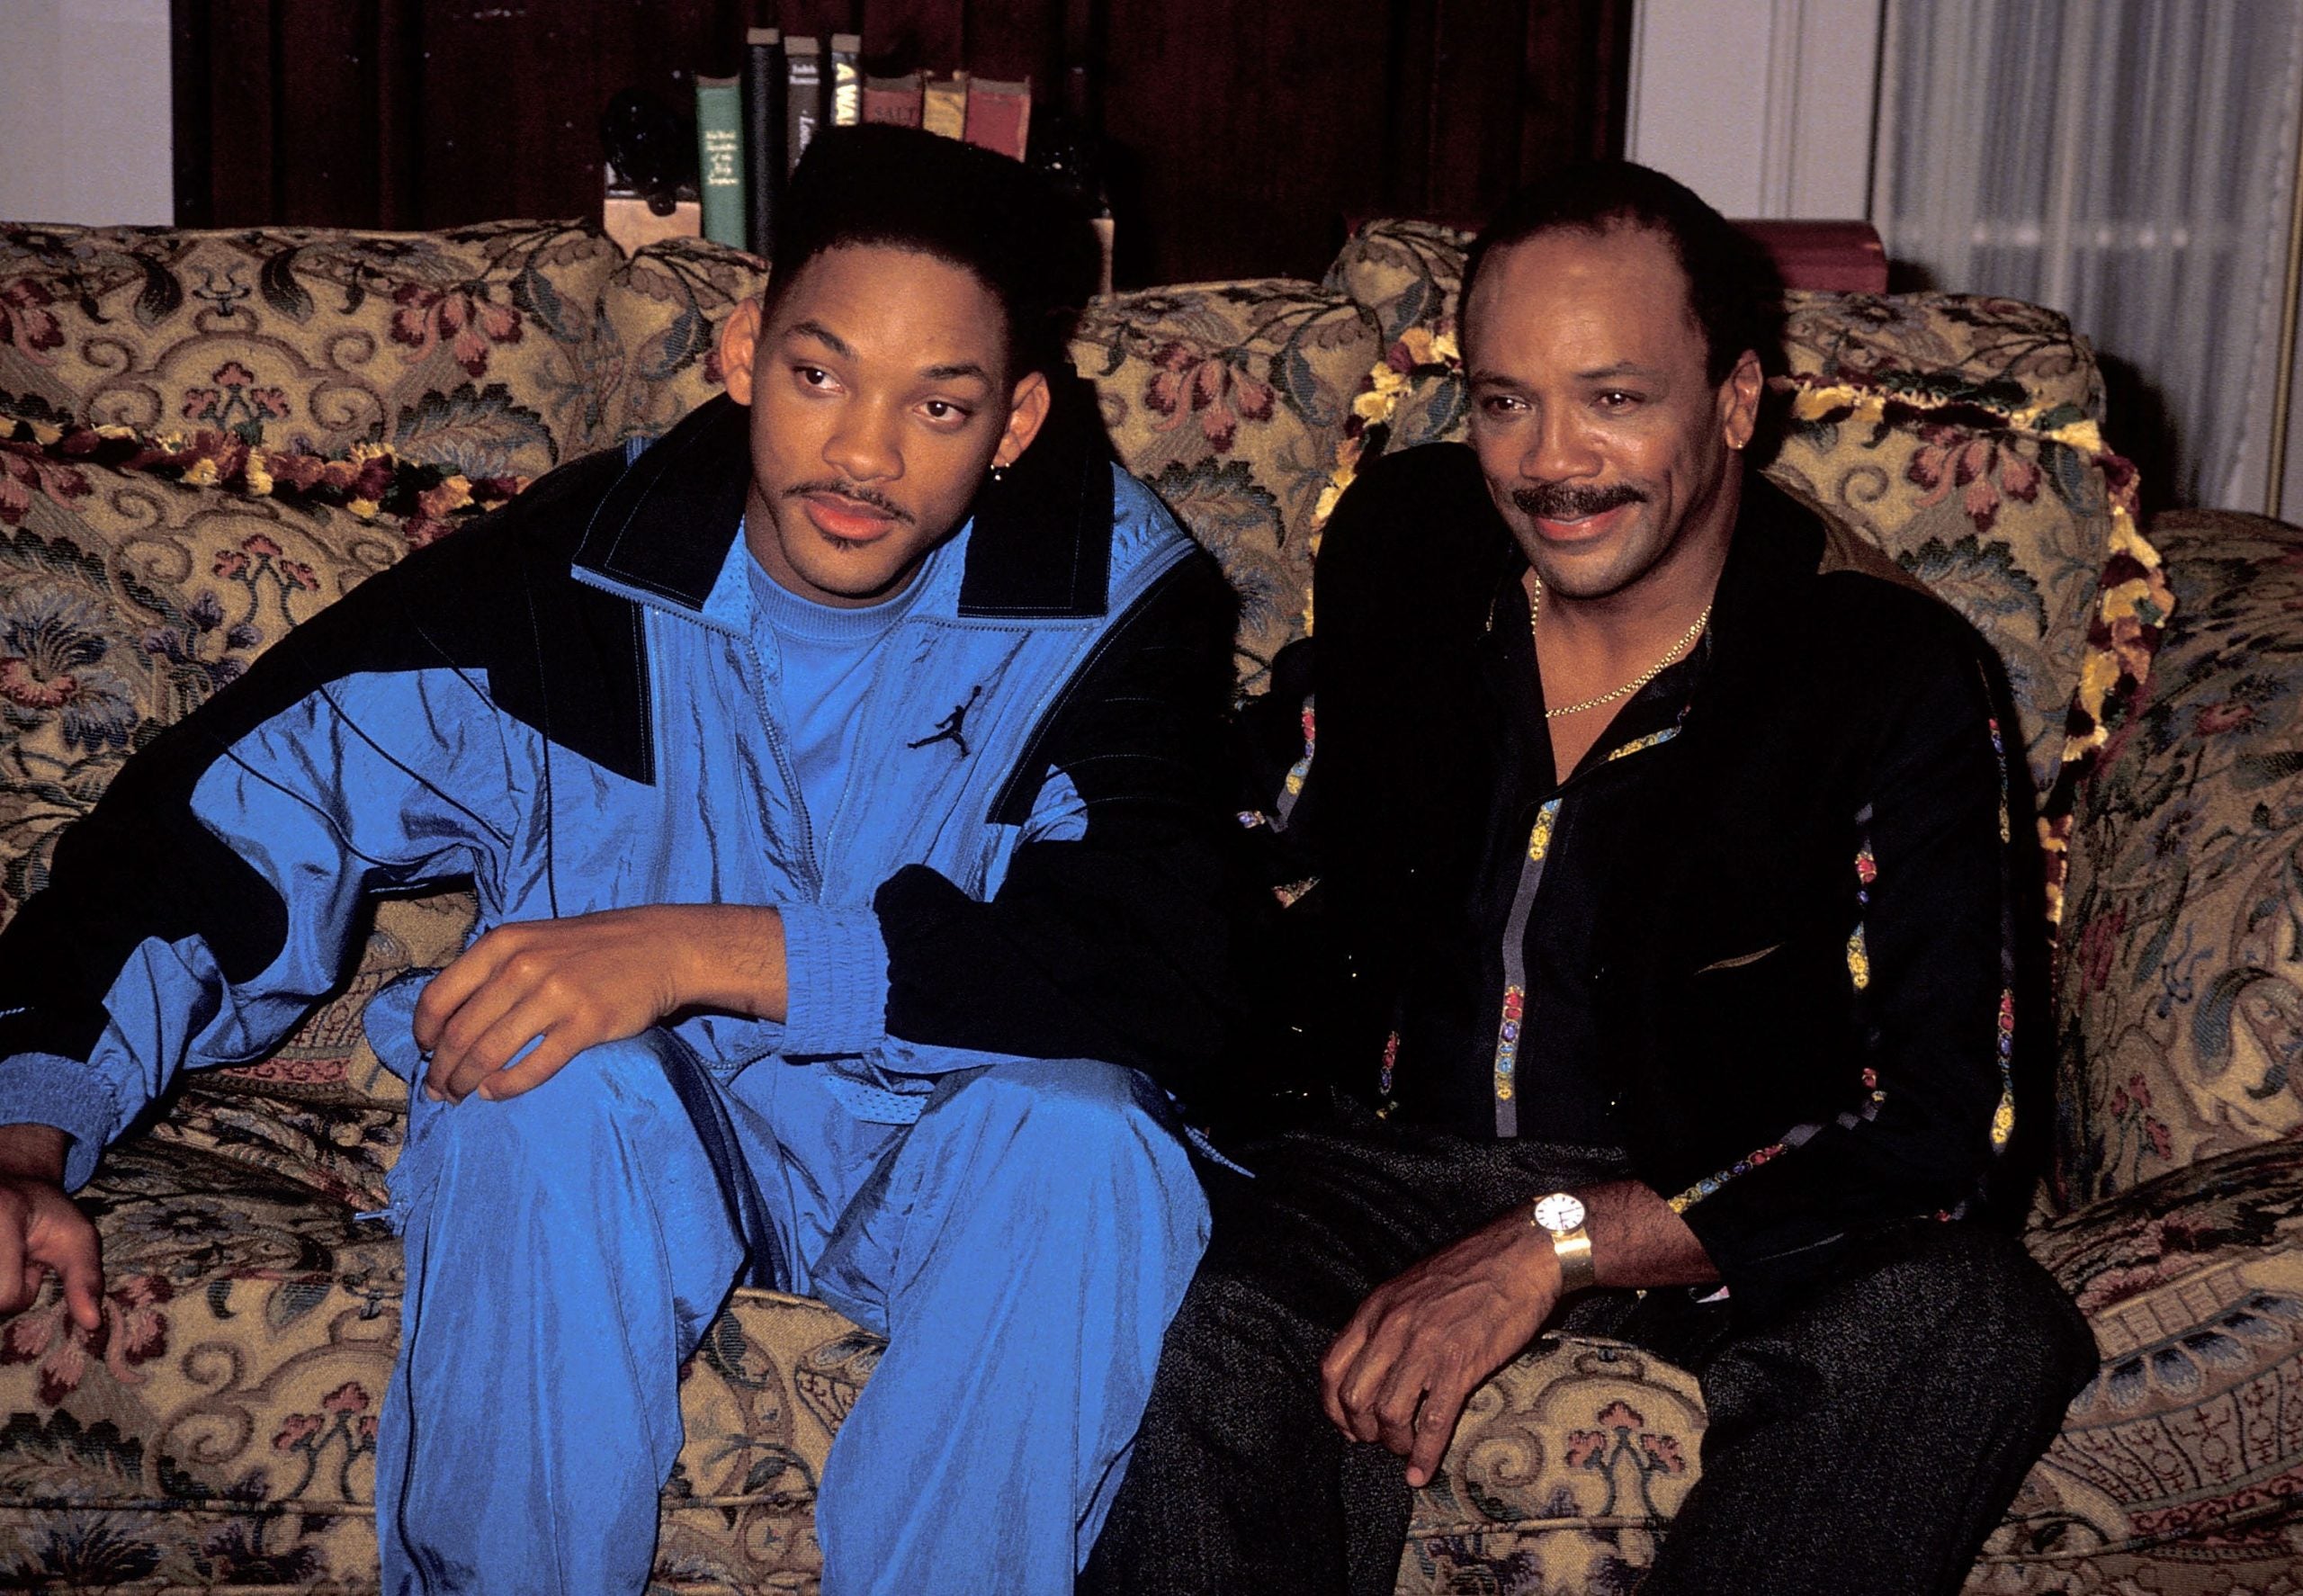 7 Things We Learned From the ‘Fresh Prince of Bel-Air’ Reunion